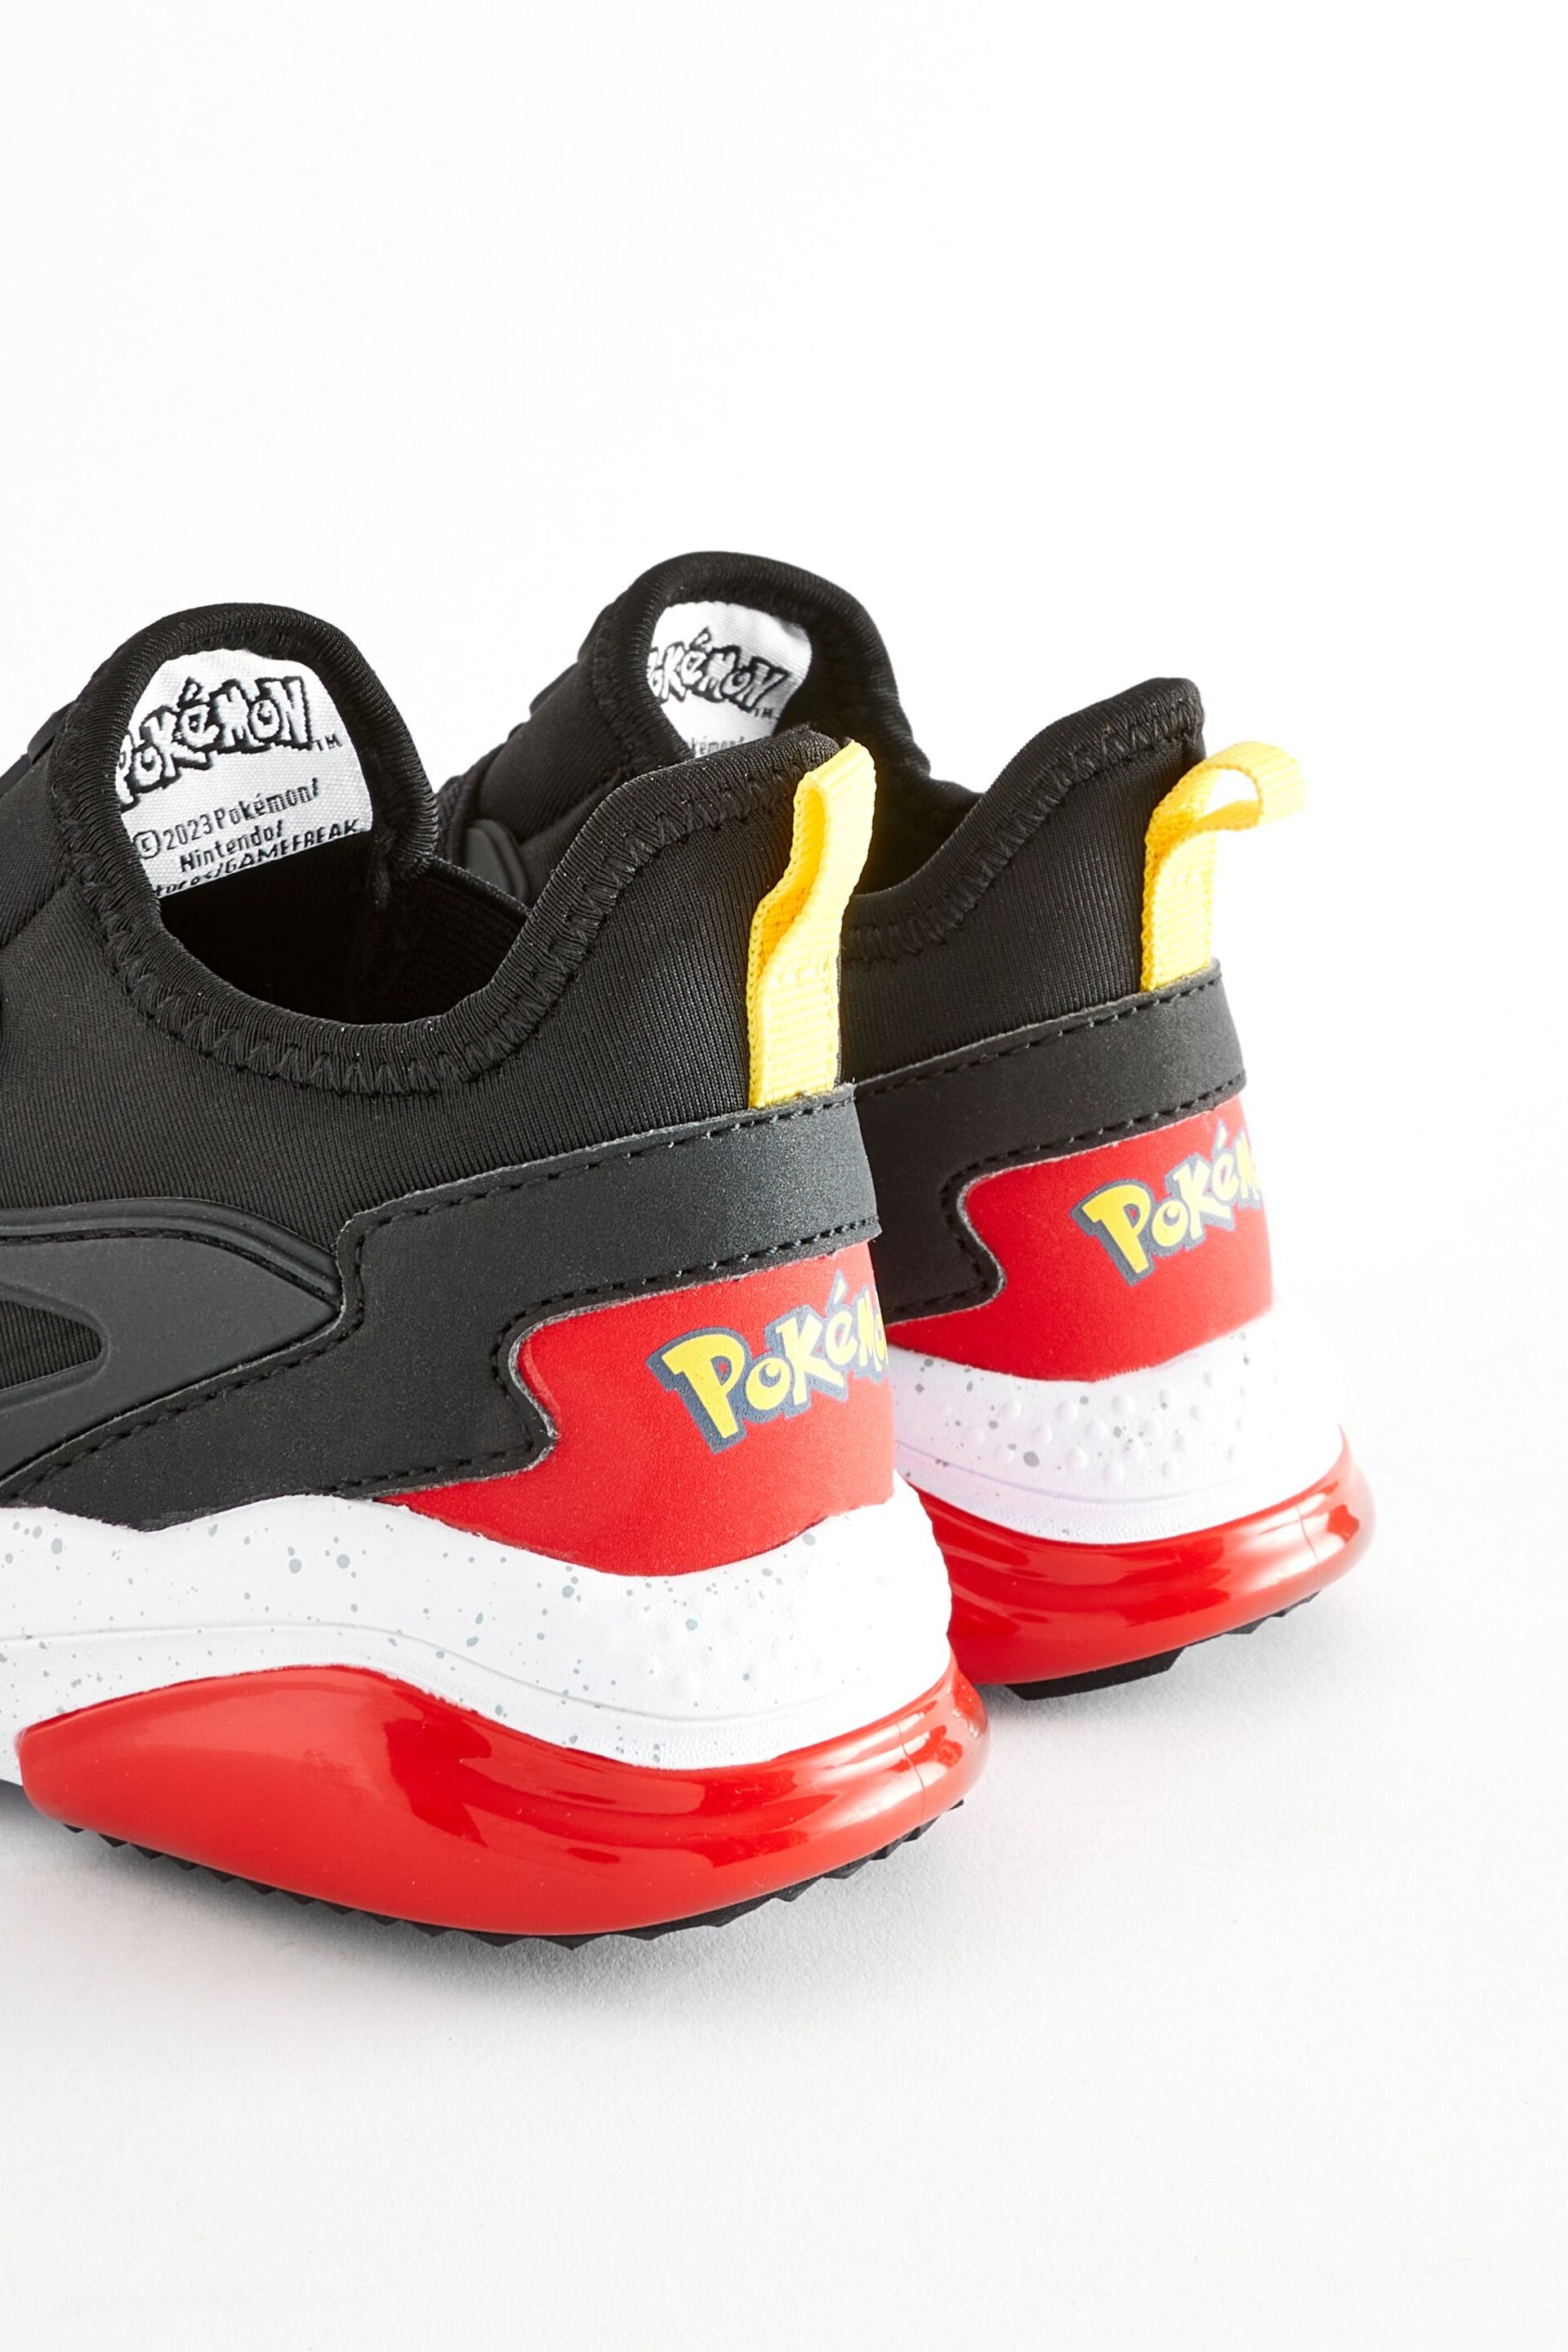 Black/Red Pokemon Elastic Lace Trainers - Image 6 of 6